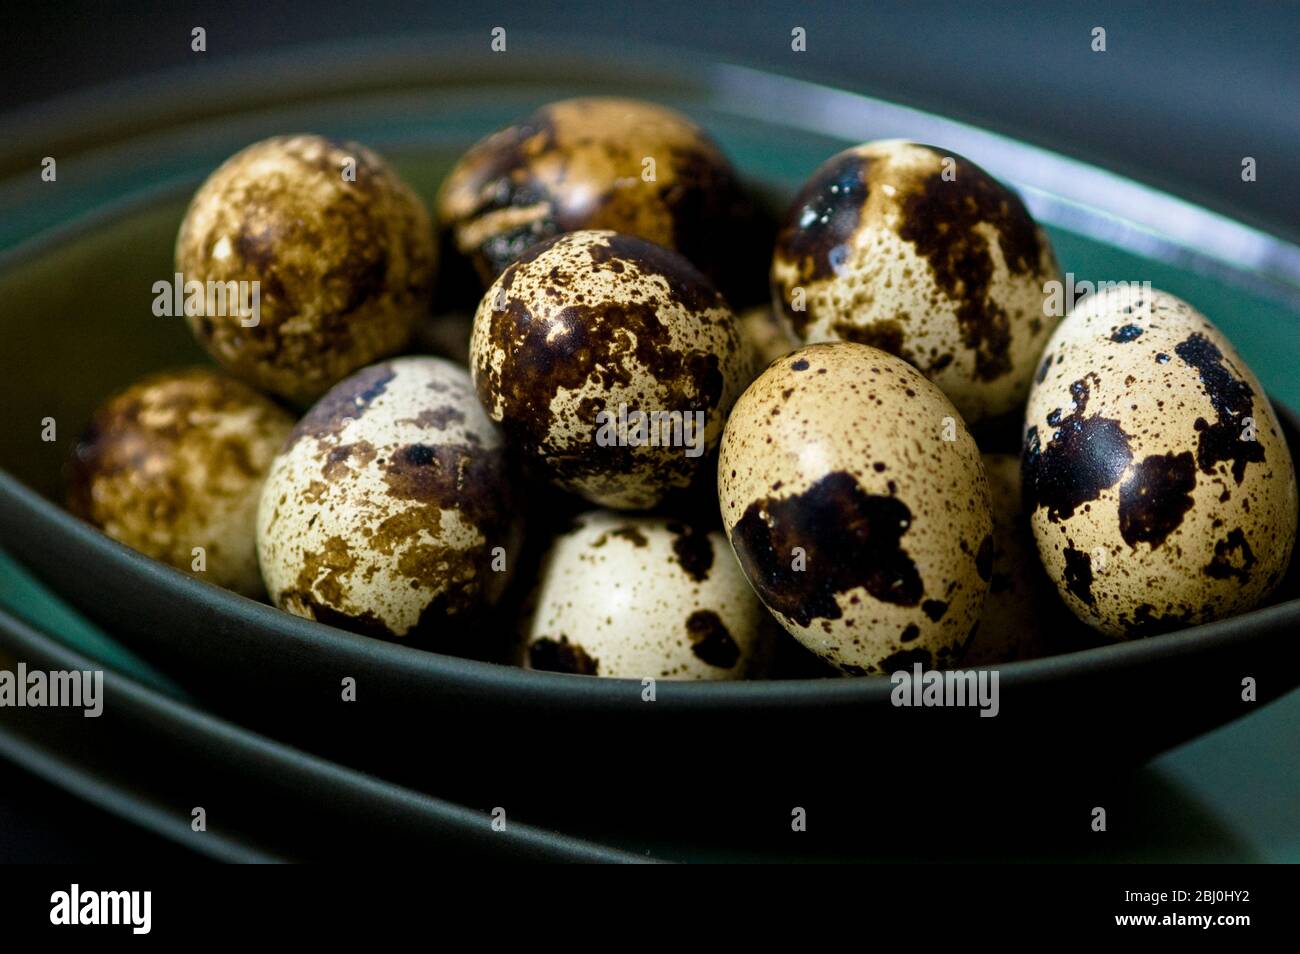 Quail's eggs in their shells in dark green bowls stacked - Stock Photo